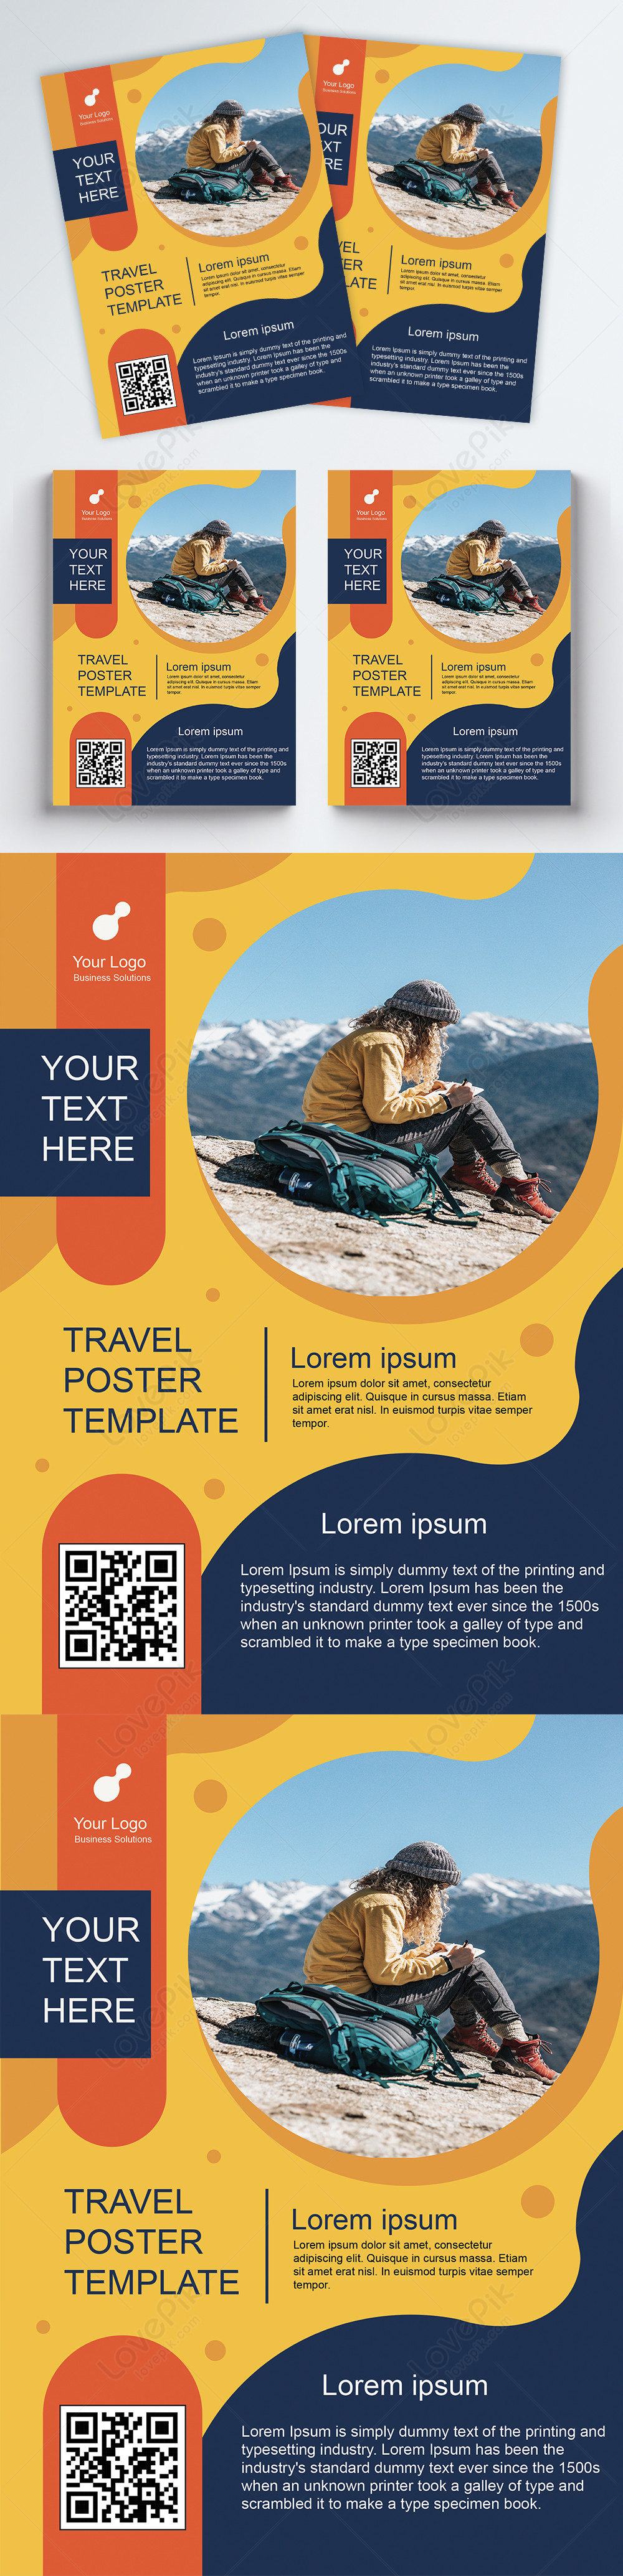 Travel Flyers Template Image picture Free Download 450081082 lovepik